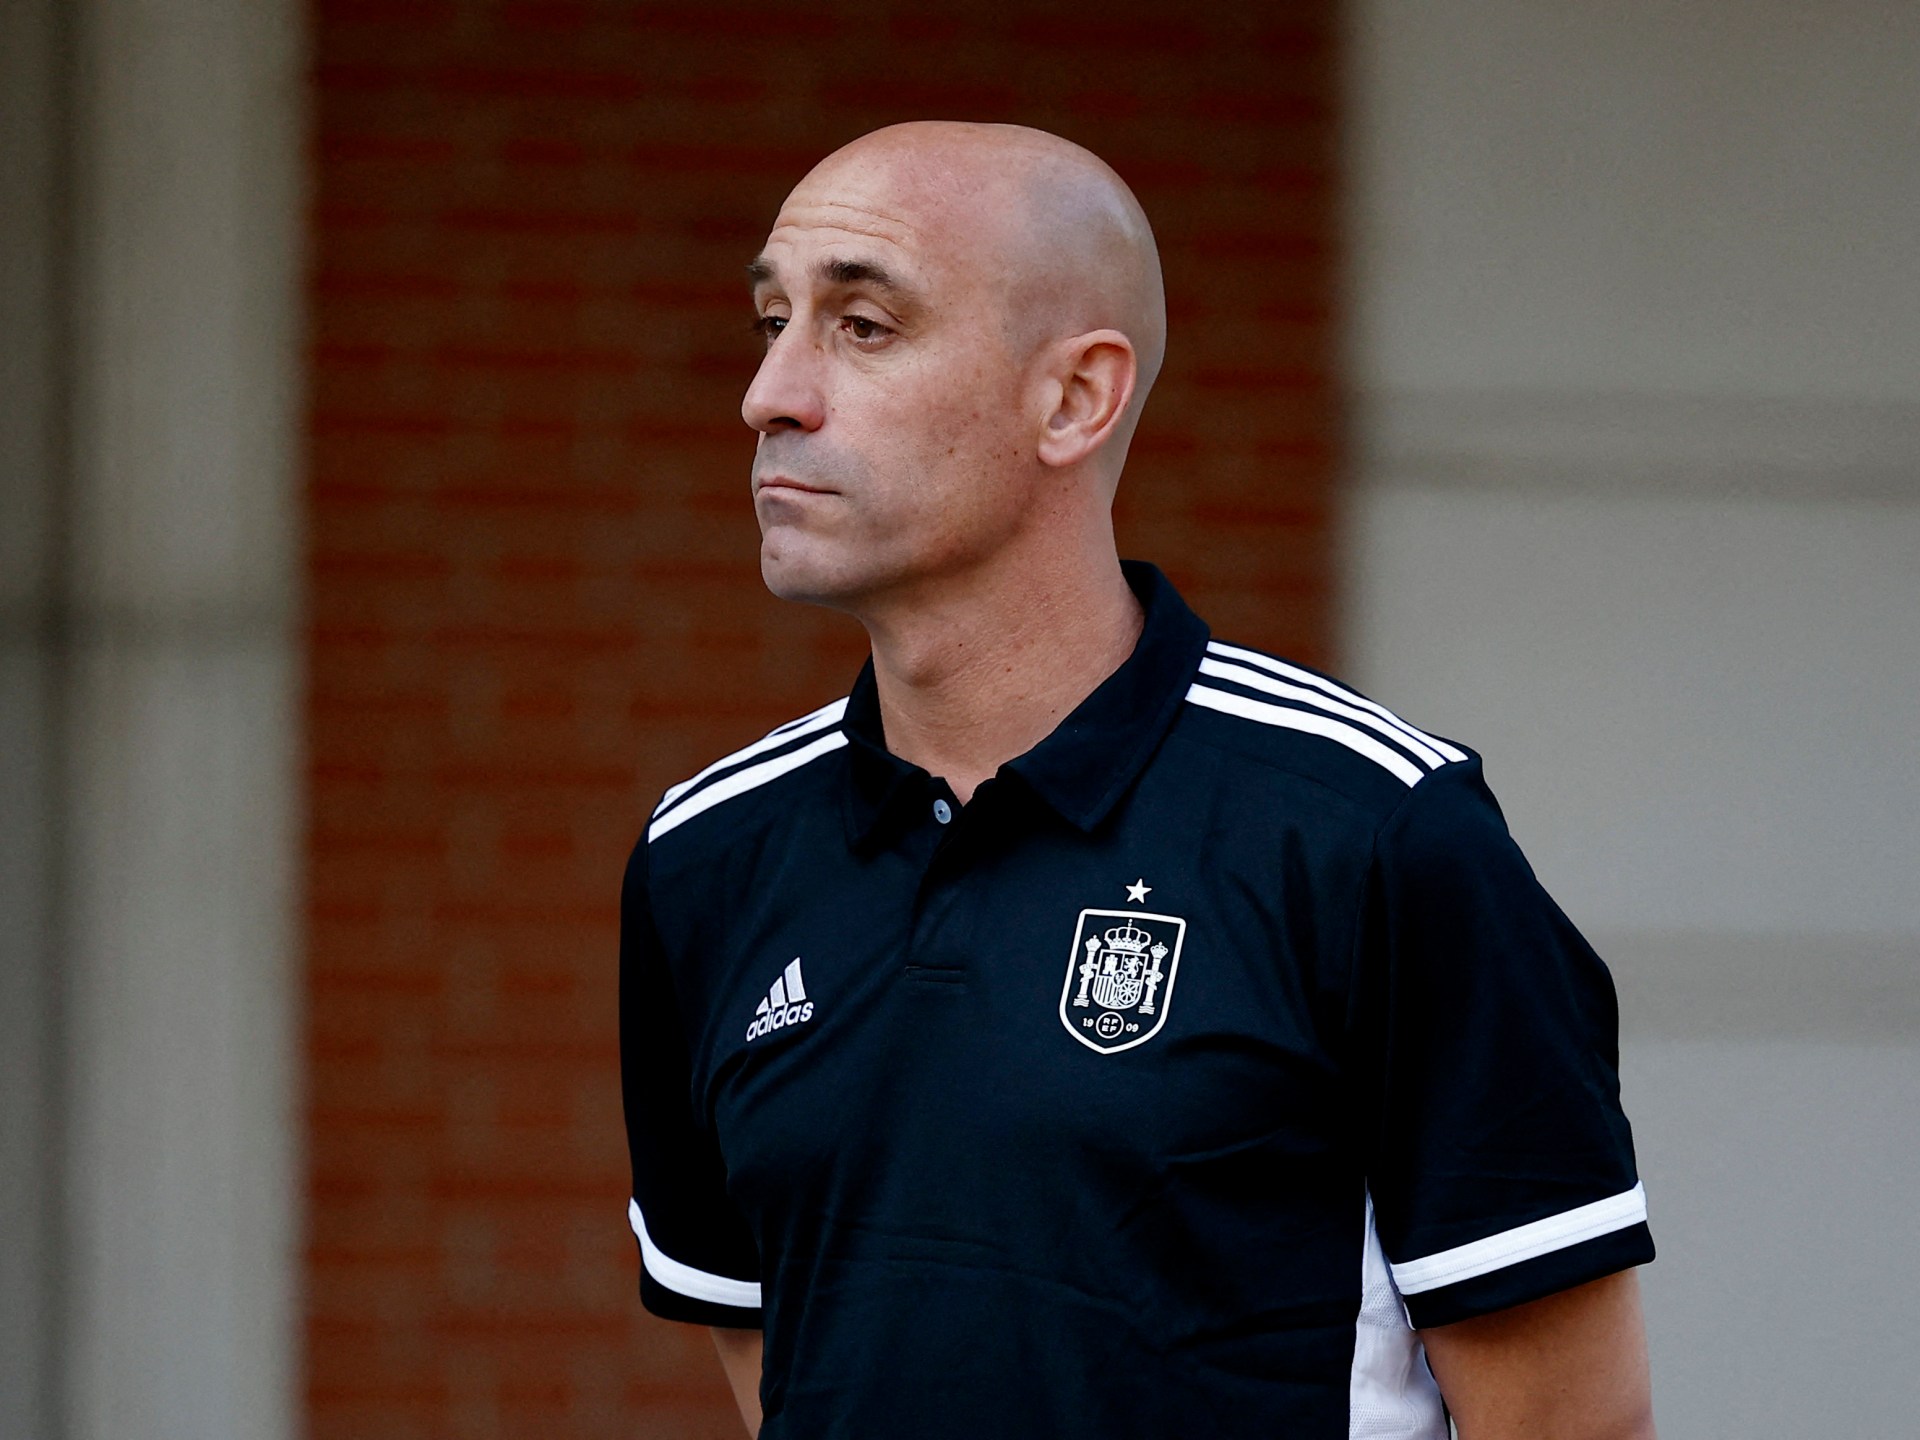 Spain’s football chief Luis Rubiales to resign after World Cup kiss scandal | Women’s World Cup News